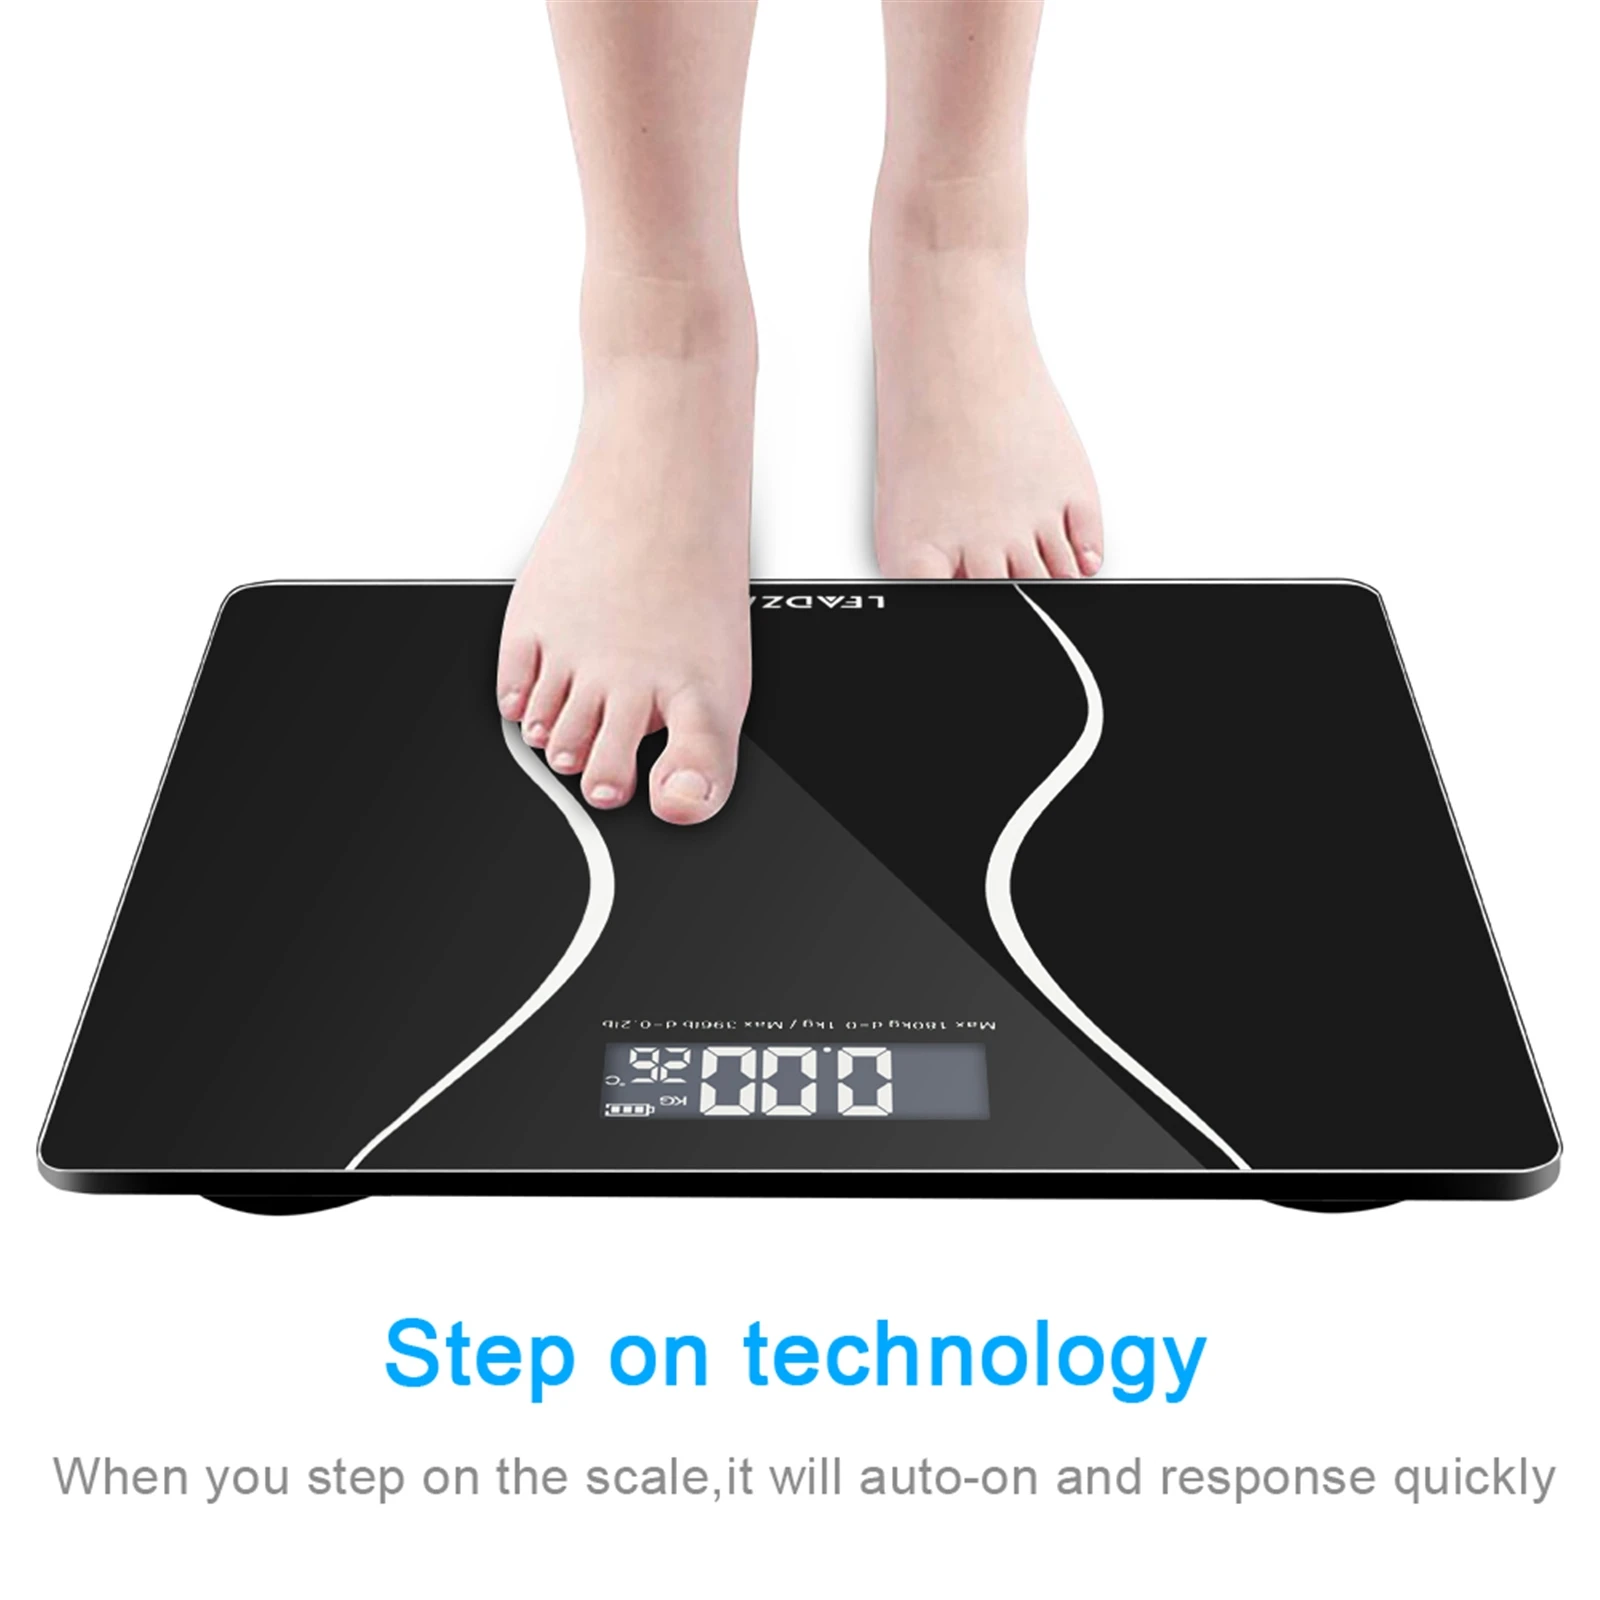 Body Fat Scale BMI Scales Smart Wireless Digital Bathroom Weight Scale Electronic Body Composition Analyzer Weighing Scale digital body fat scale smart step on technology healthy weighing tools universal monitoring health touch portable